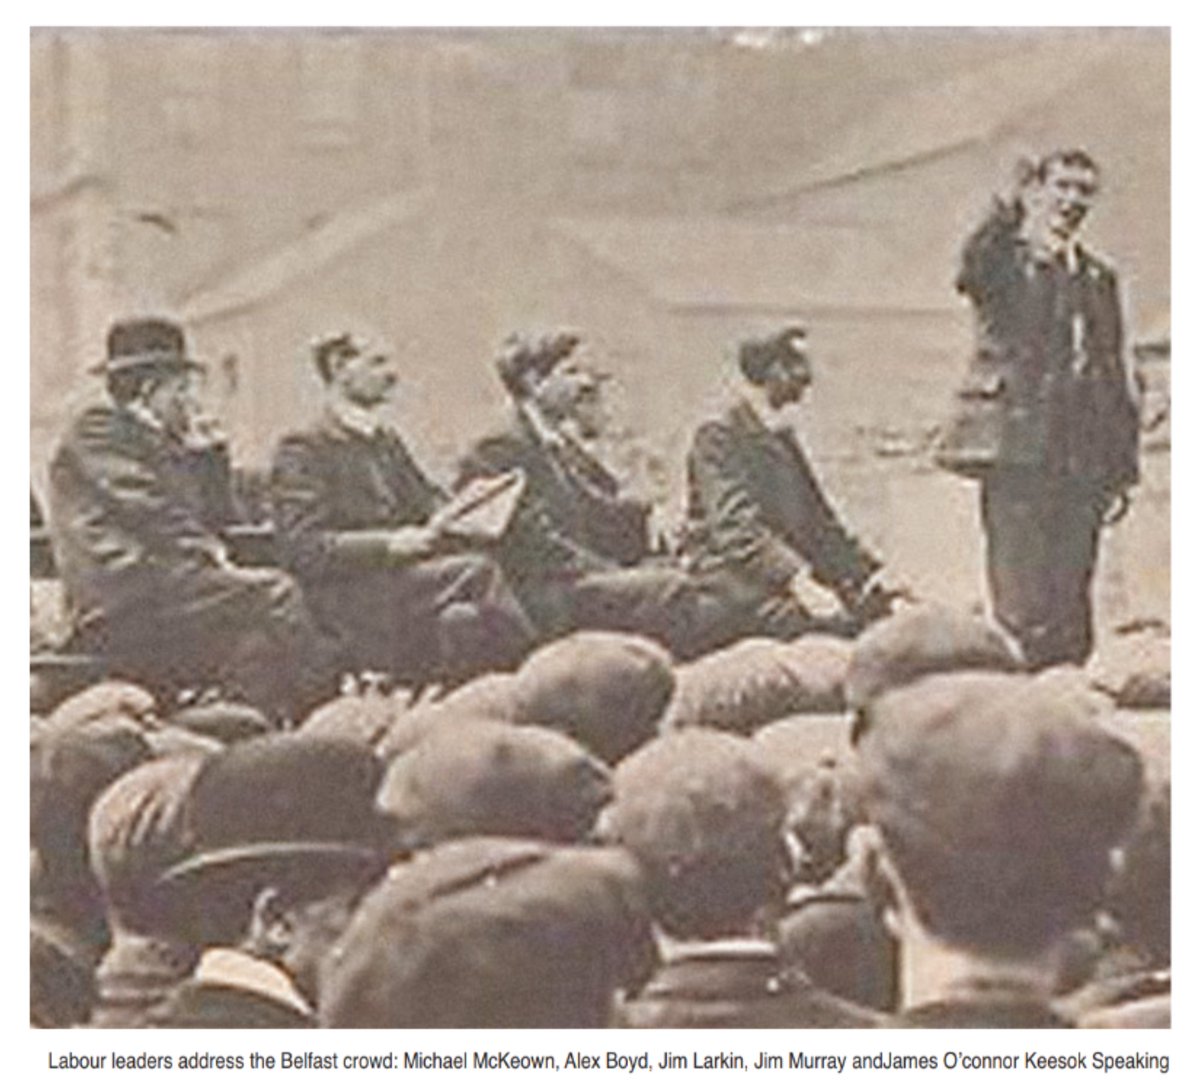 Jim Larkin organised the workers into a militant force that could fight effectively for improvements, establishing new branches of the National Union of Dock Labourers (NUDL). Strikes spread across the city with support from the population and from workers in Britain.